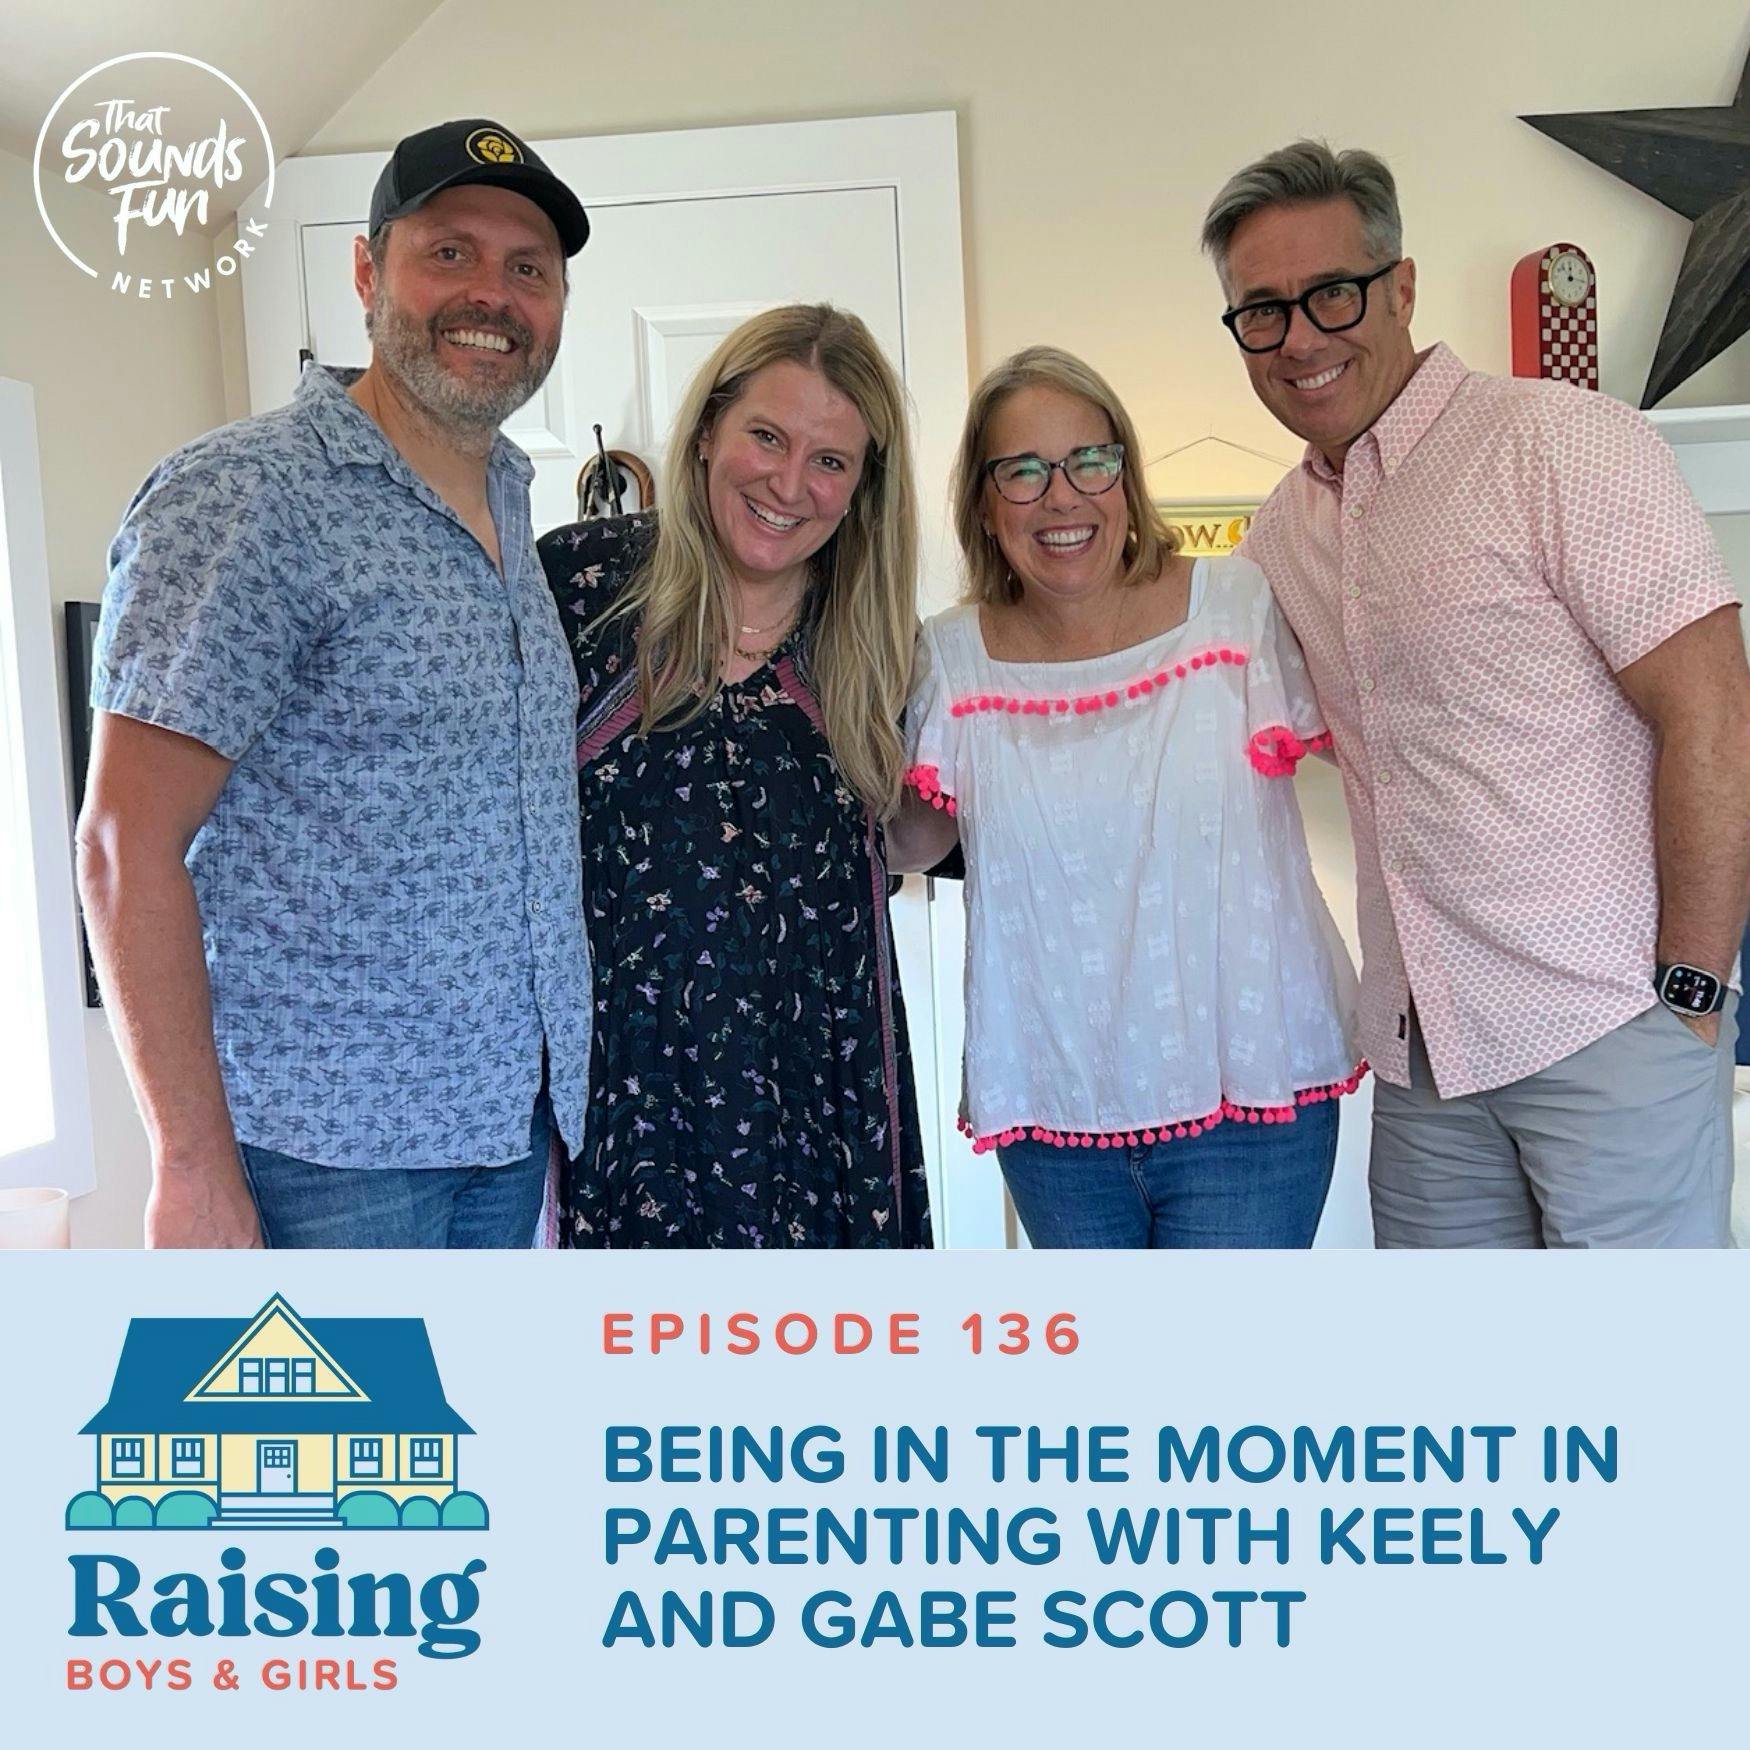 Episode 136: Being in the Moment in Parenting with Keely and Gabe Scott